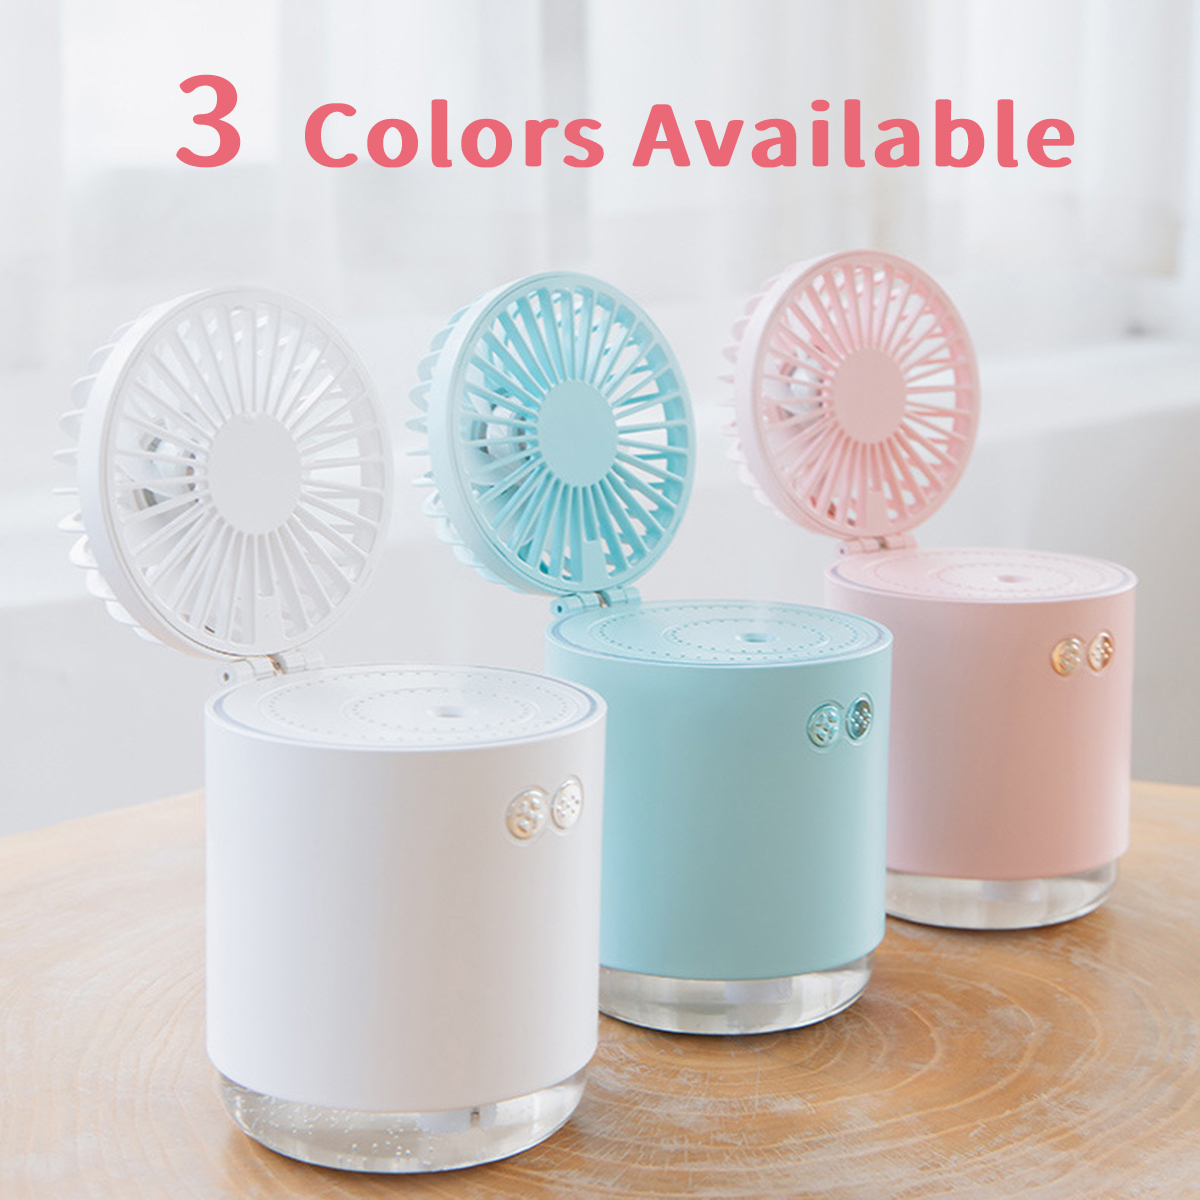 Multifunctional-2000mAh-Mini-USB-Rechargeable-Fan-Cooler-Desktop-Spray-Humidification-with-Colorful--1864518-15